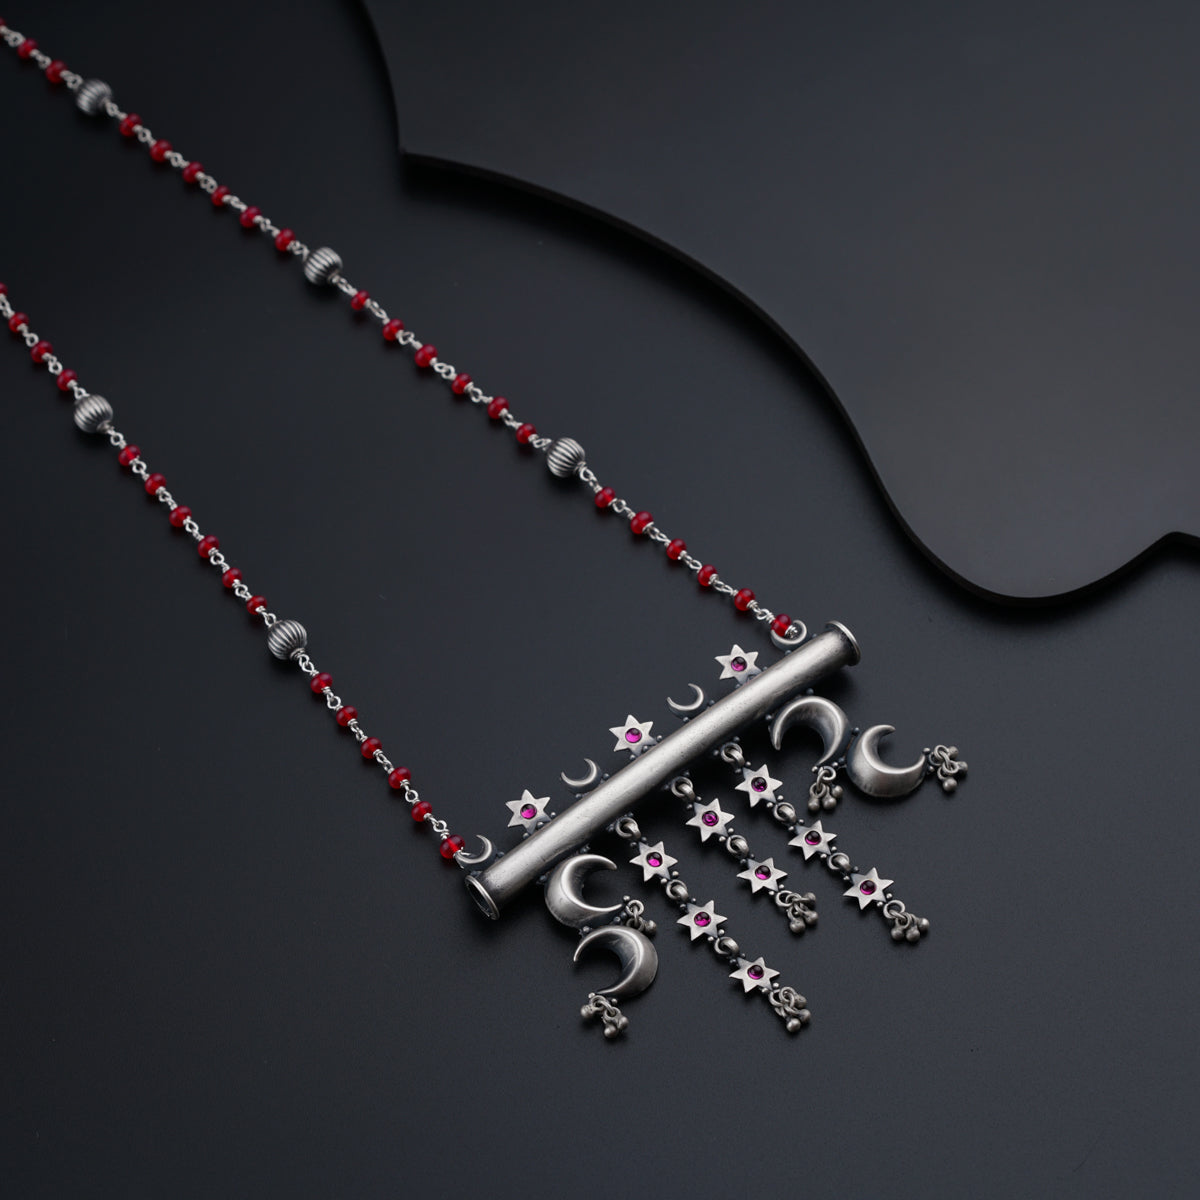 a silver necklace with red beads and stars